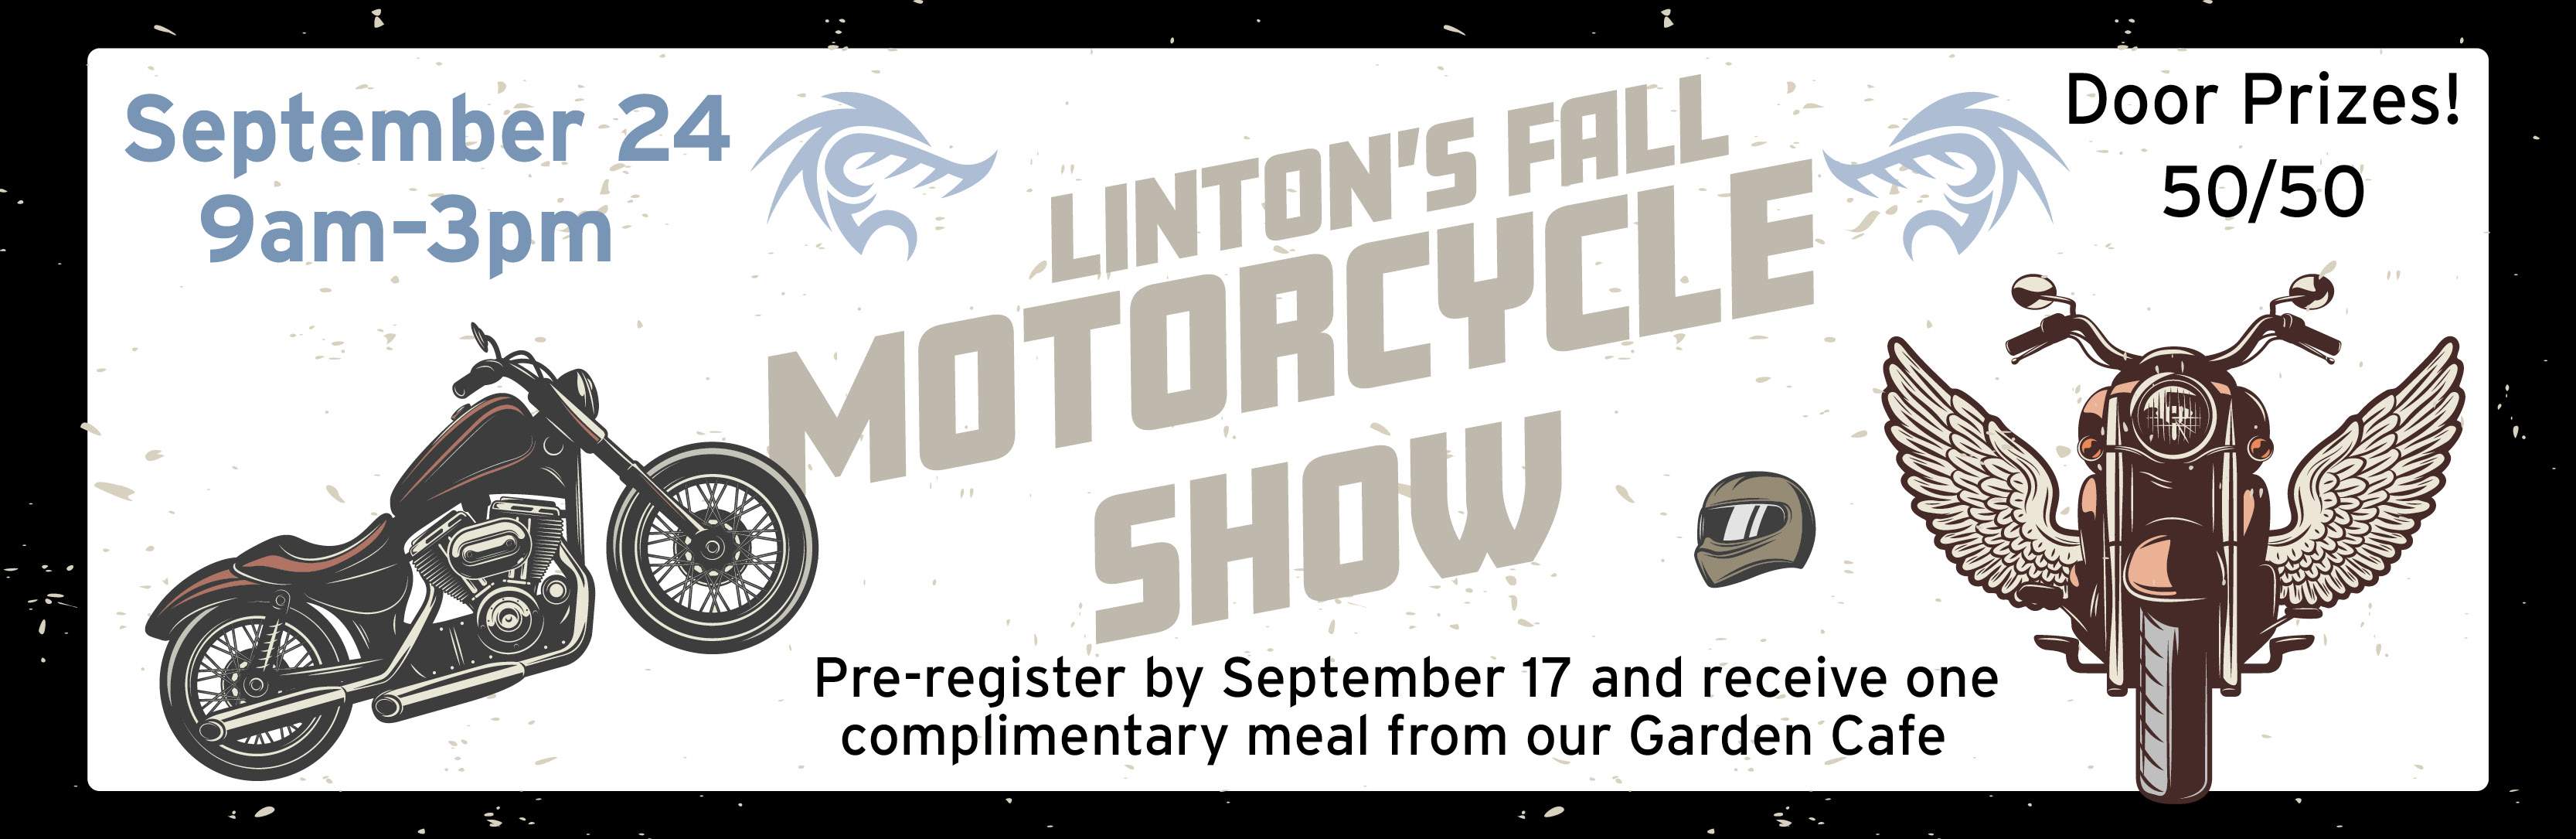 Linton's Fall Motorcycle Show